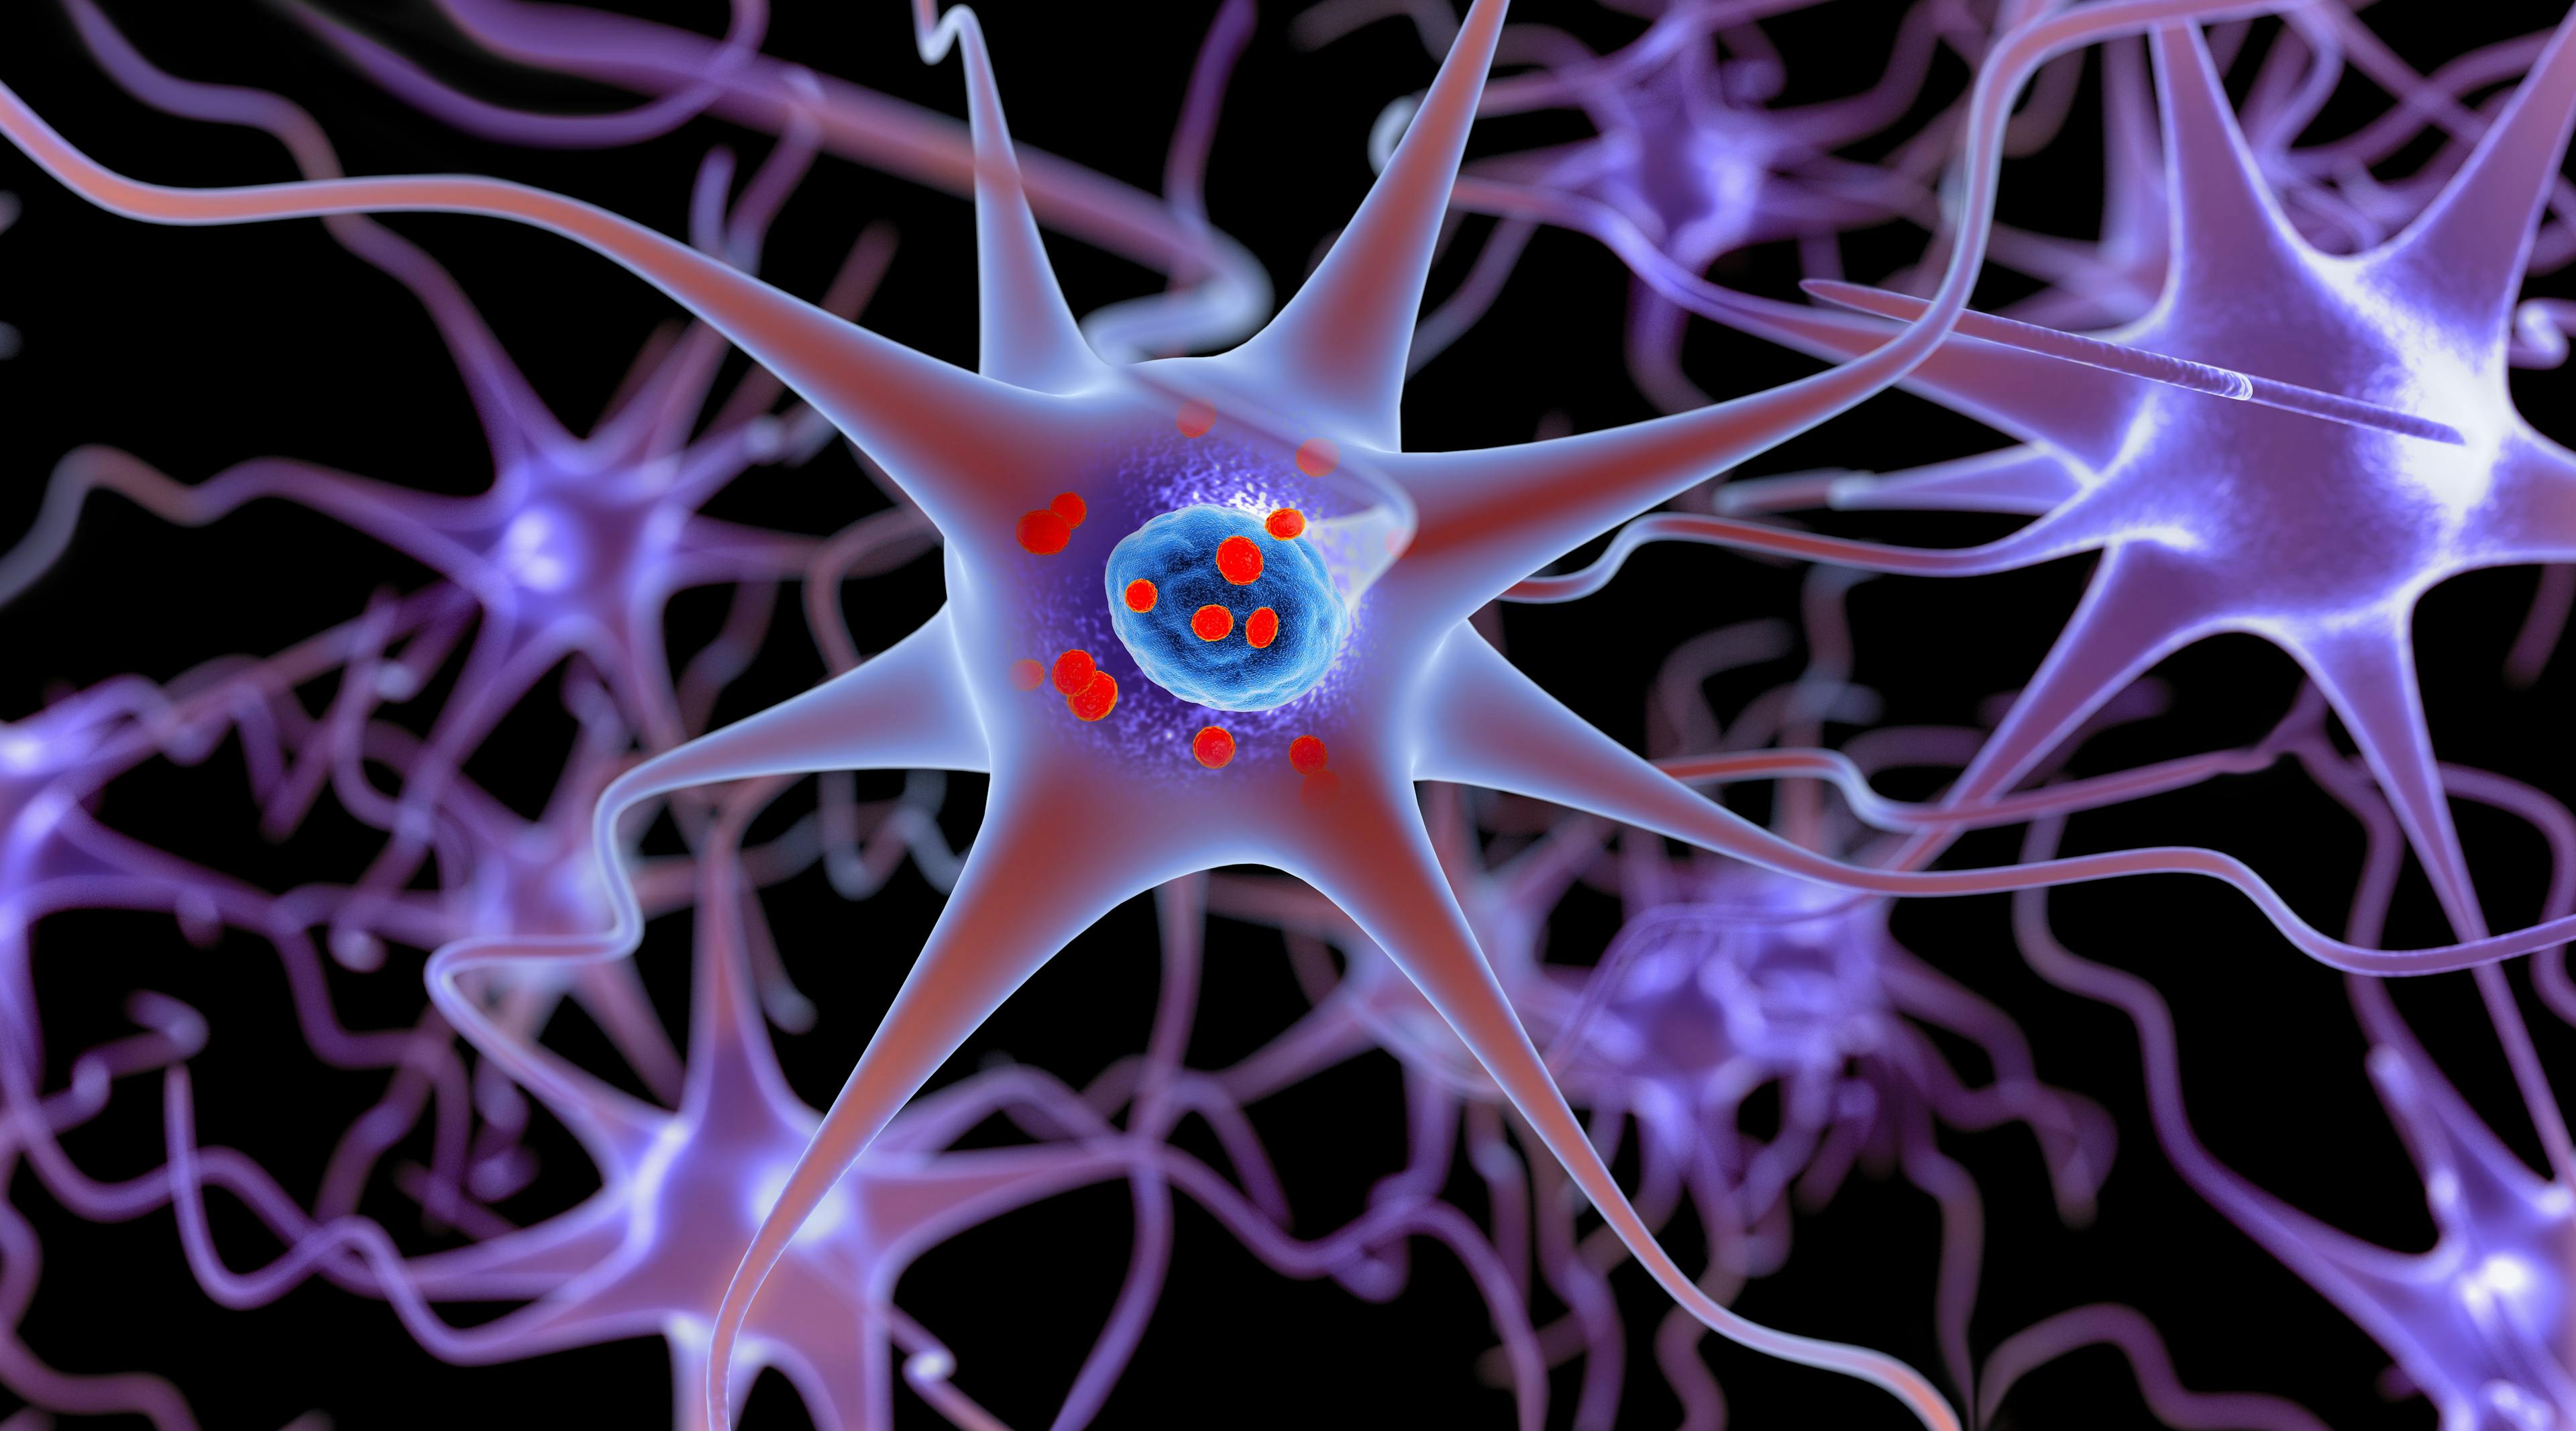 Parkinson's disease. 3D illustration showing neurons containing Lewy bodies small red spheres which are deposits of proteins (alpha-synuclein) accumulated in the brain cells